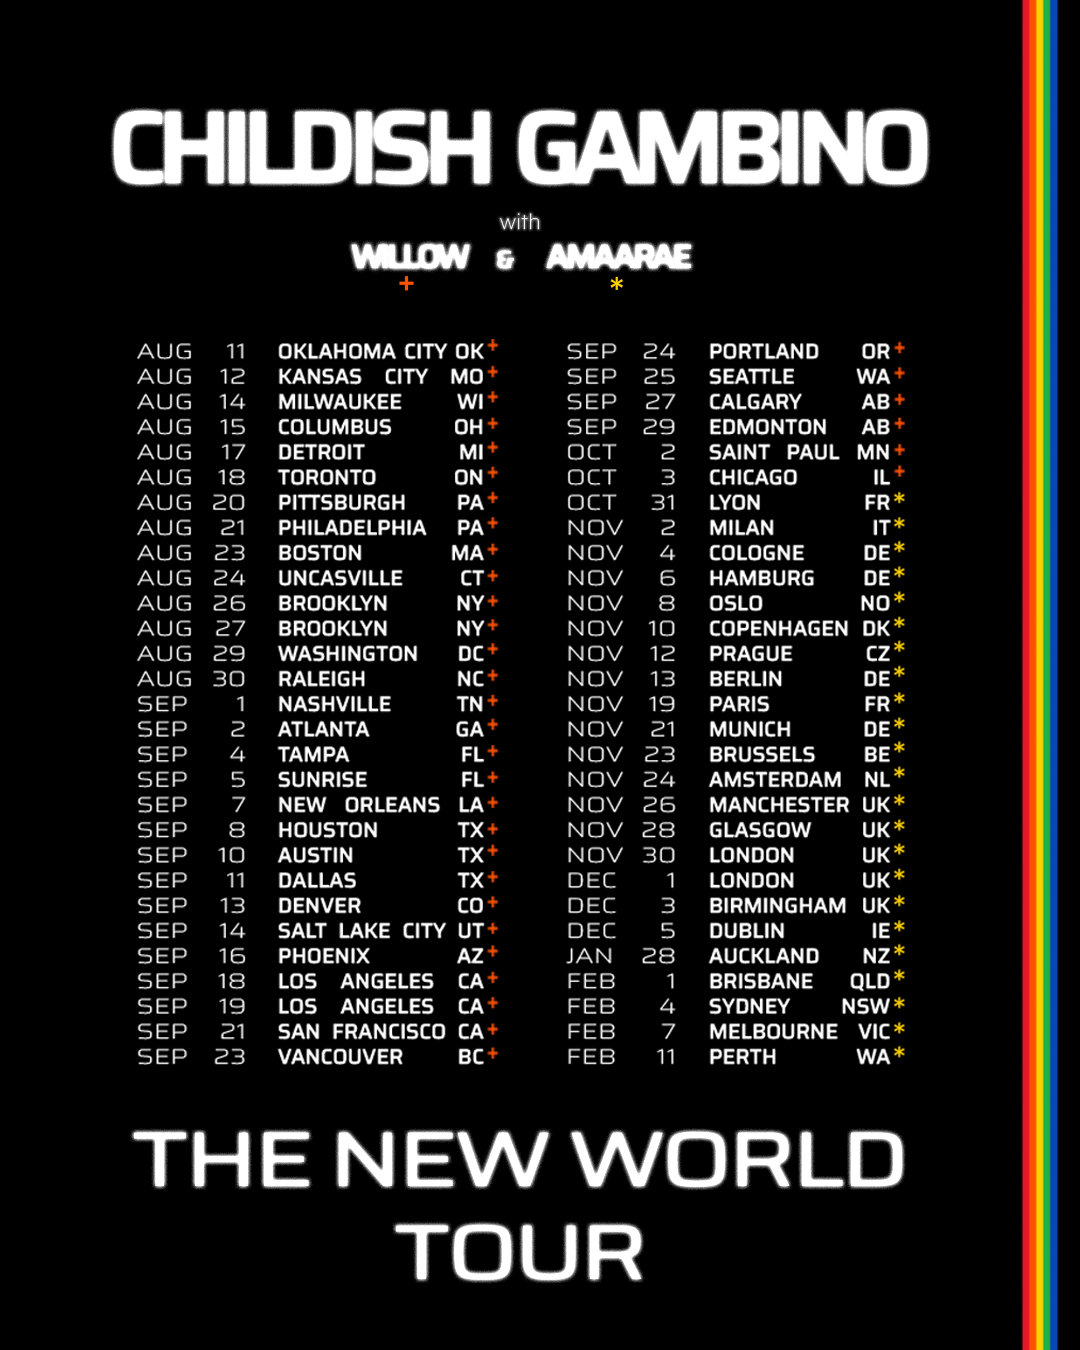 Childish Gambino announces his return to the global stage with new tour.